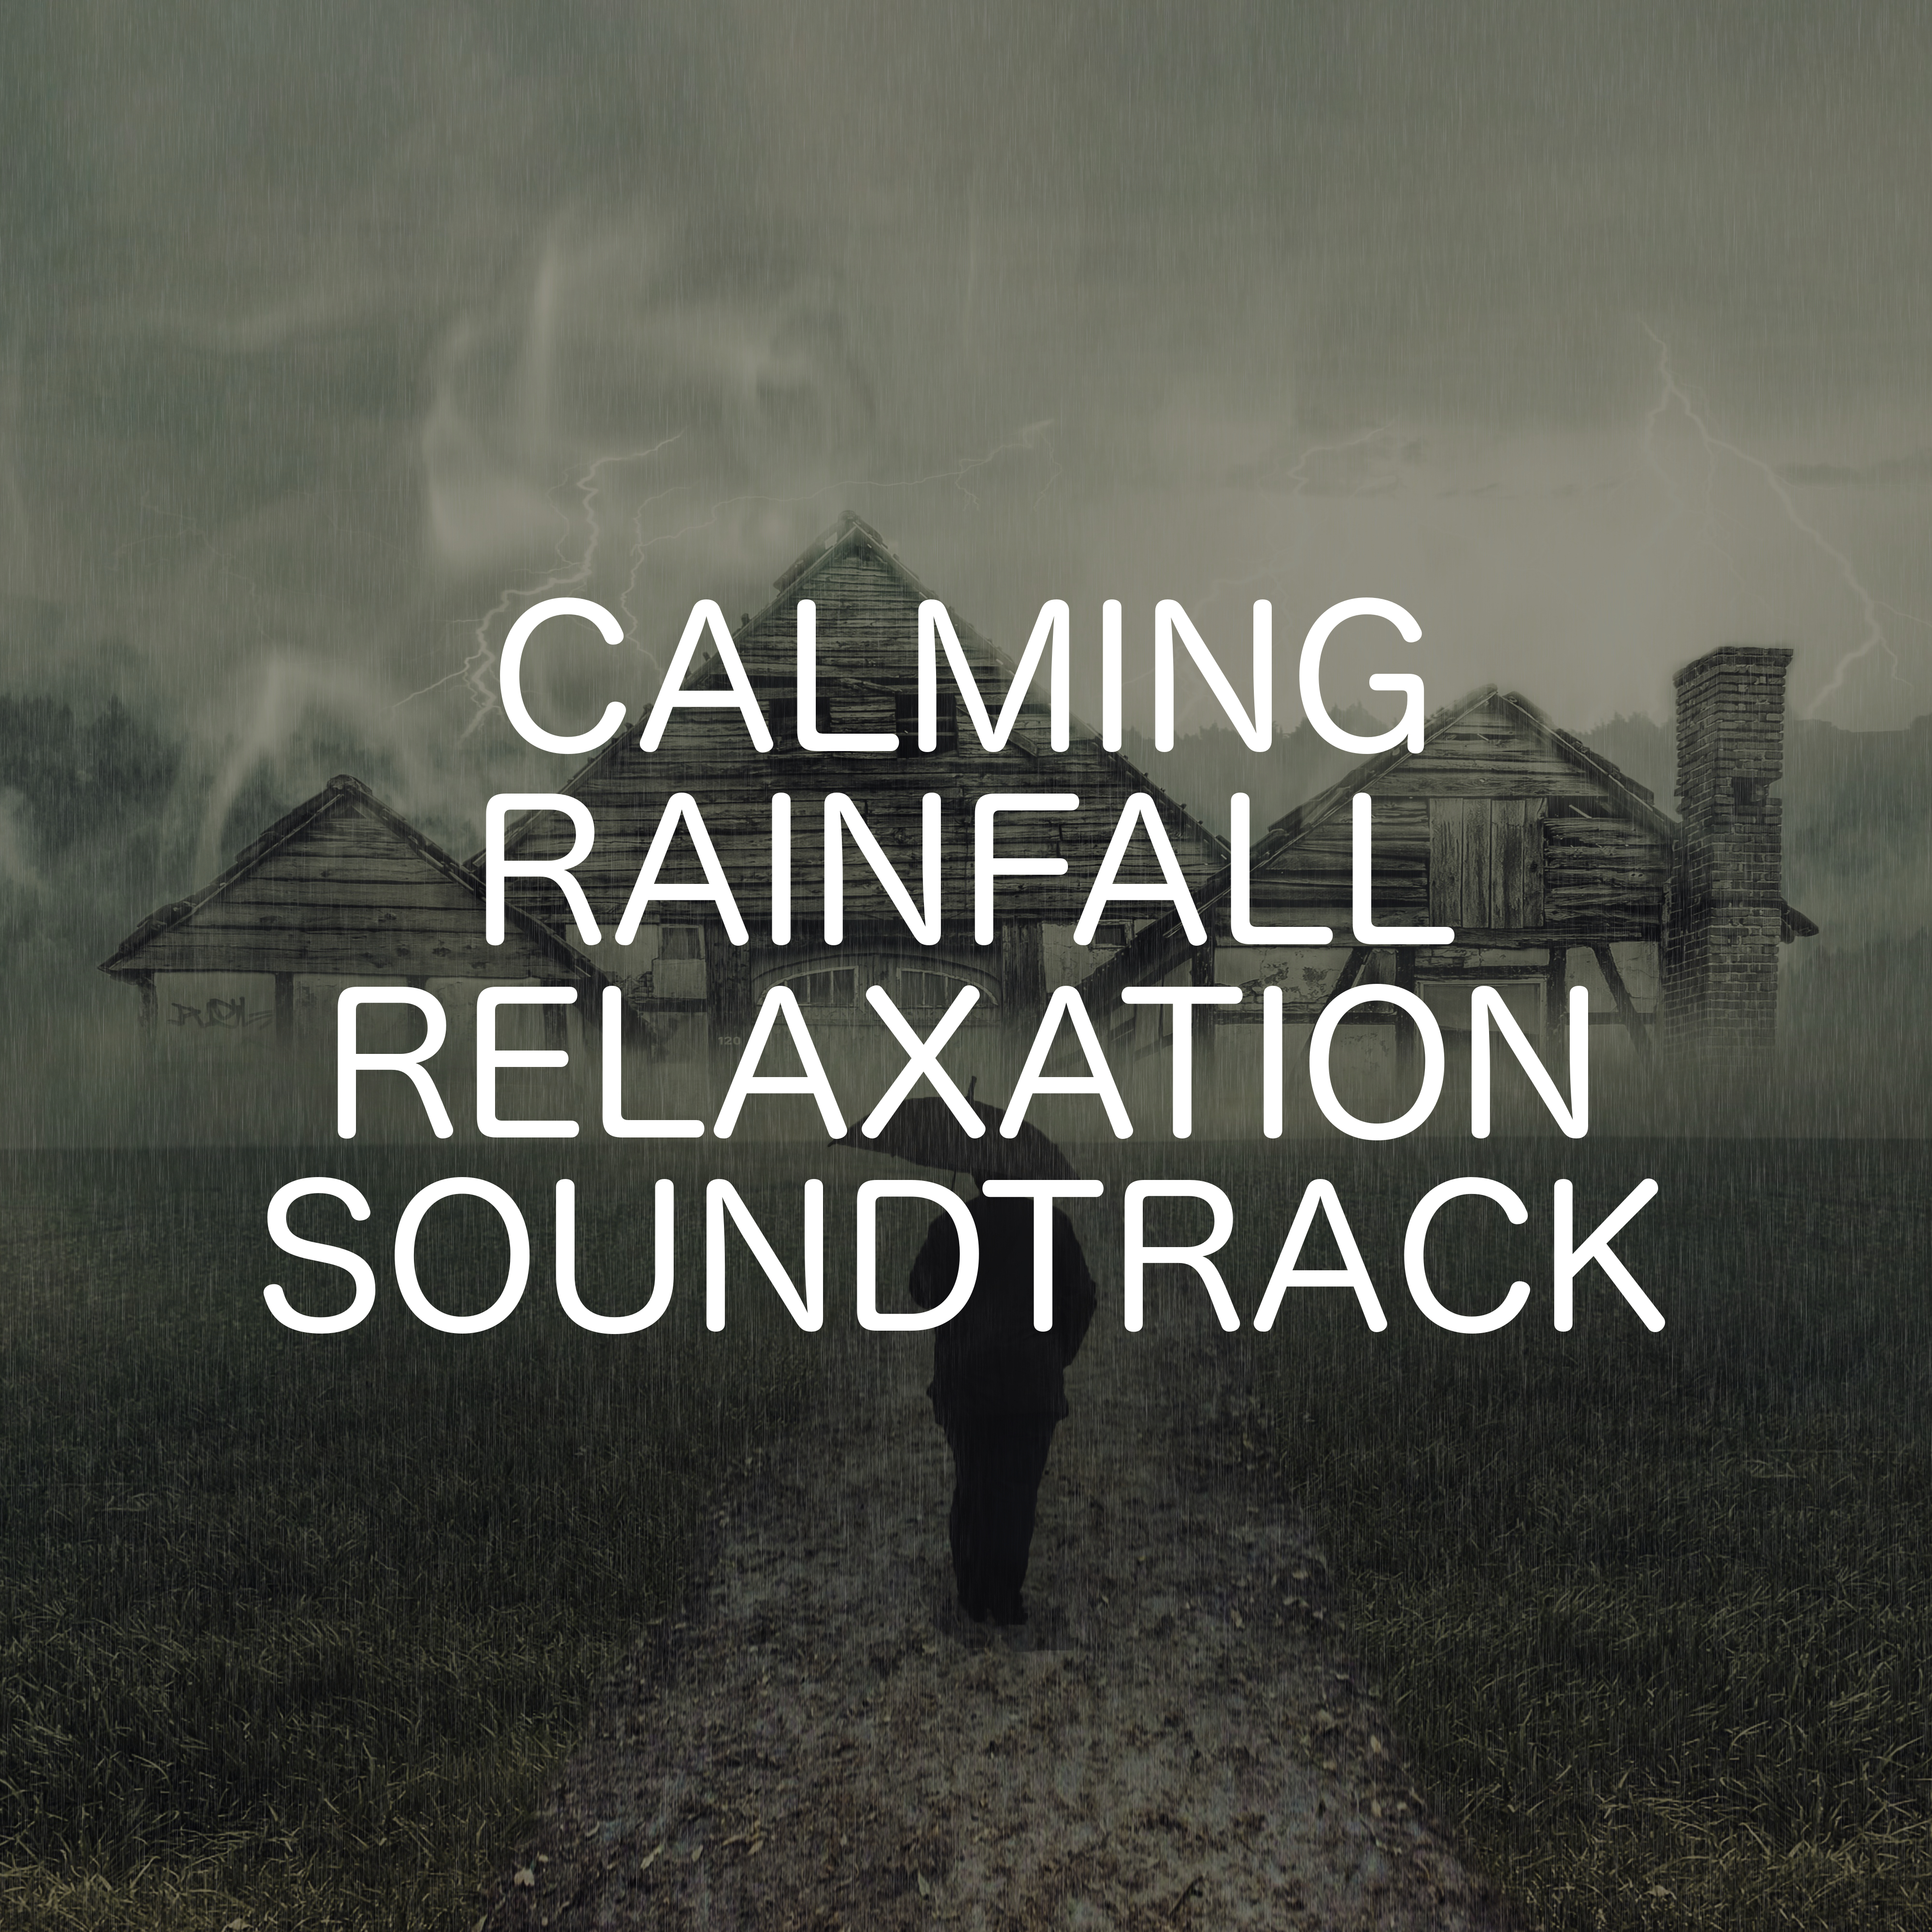 Calming Rainfall Relaxation Soundtrack